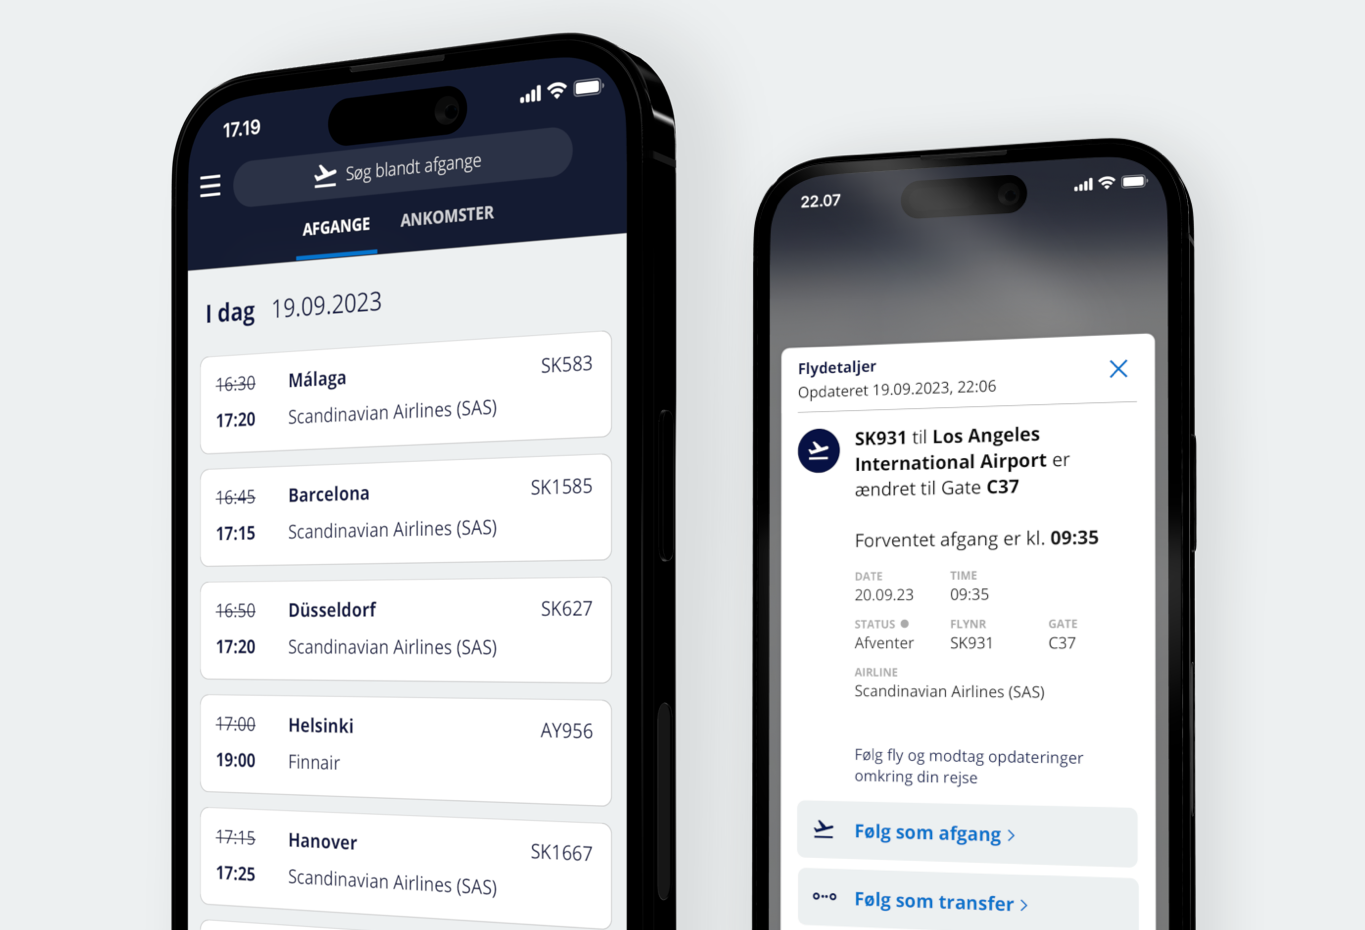 Easily find all information about your flight